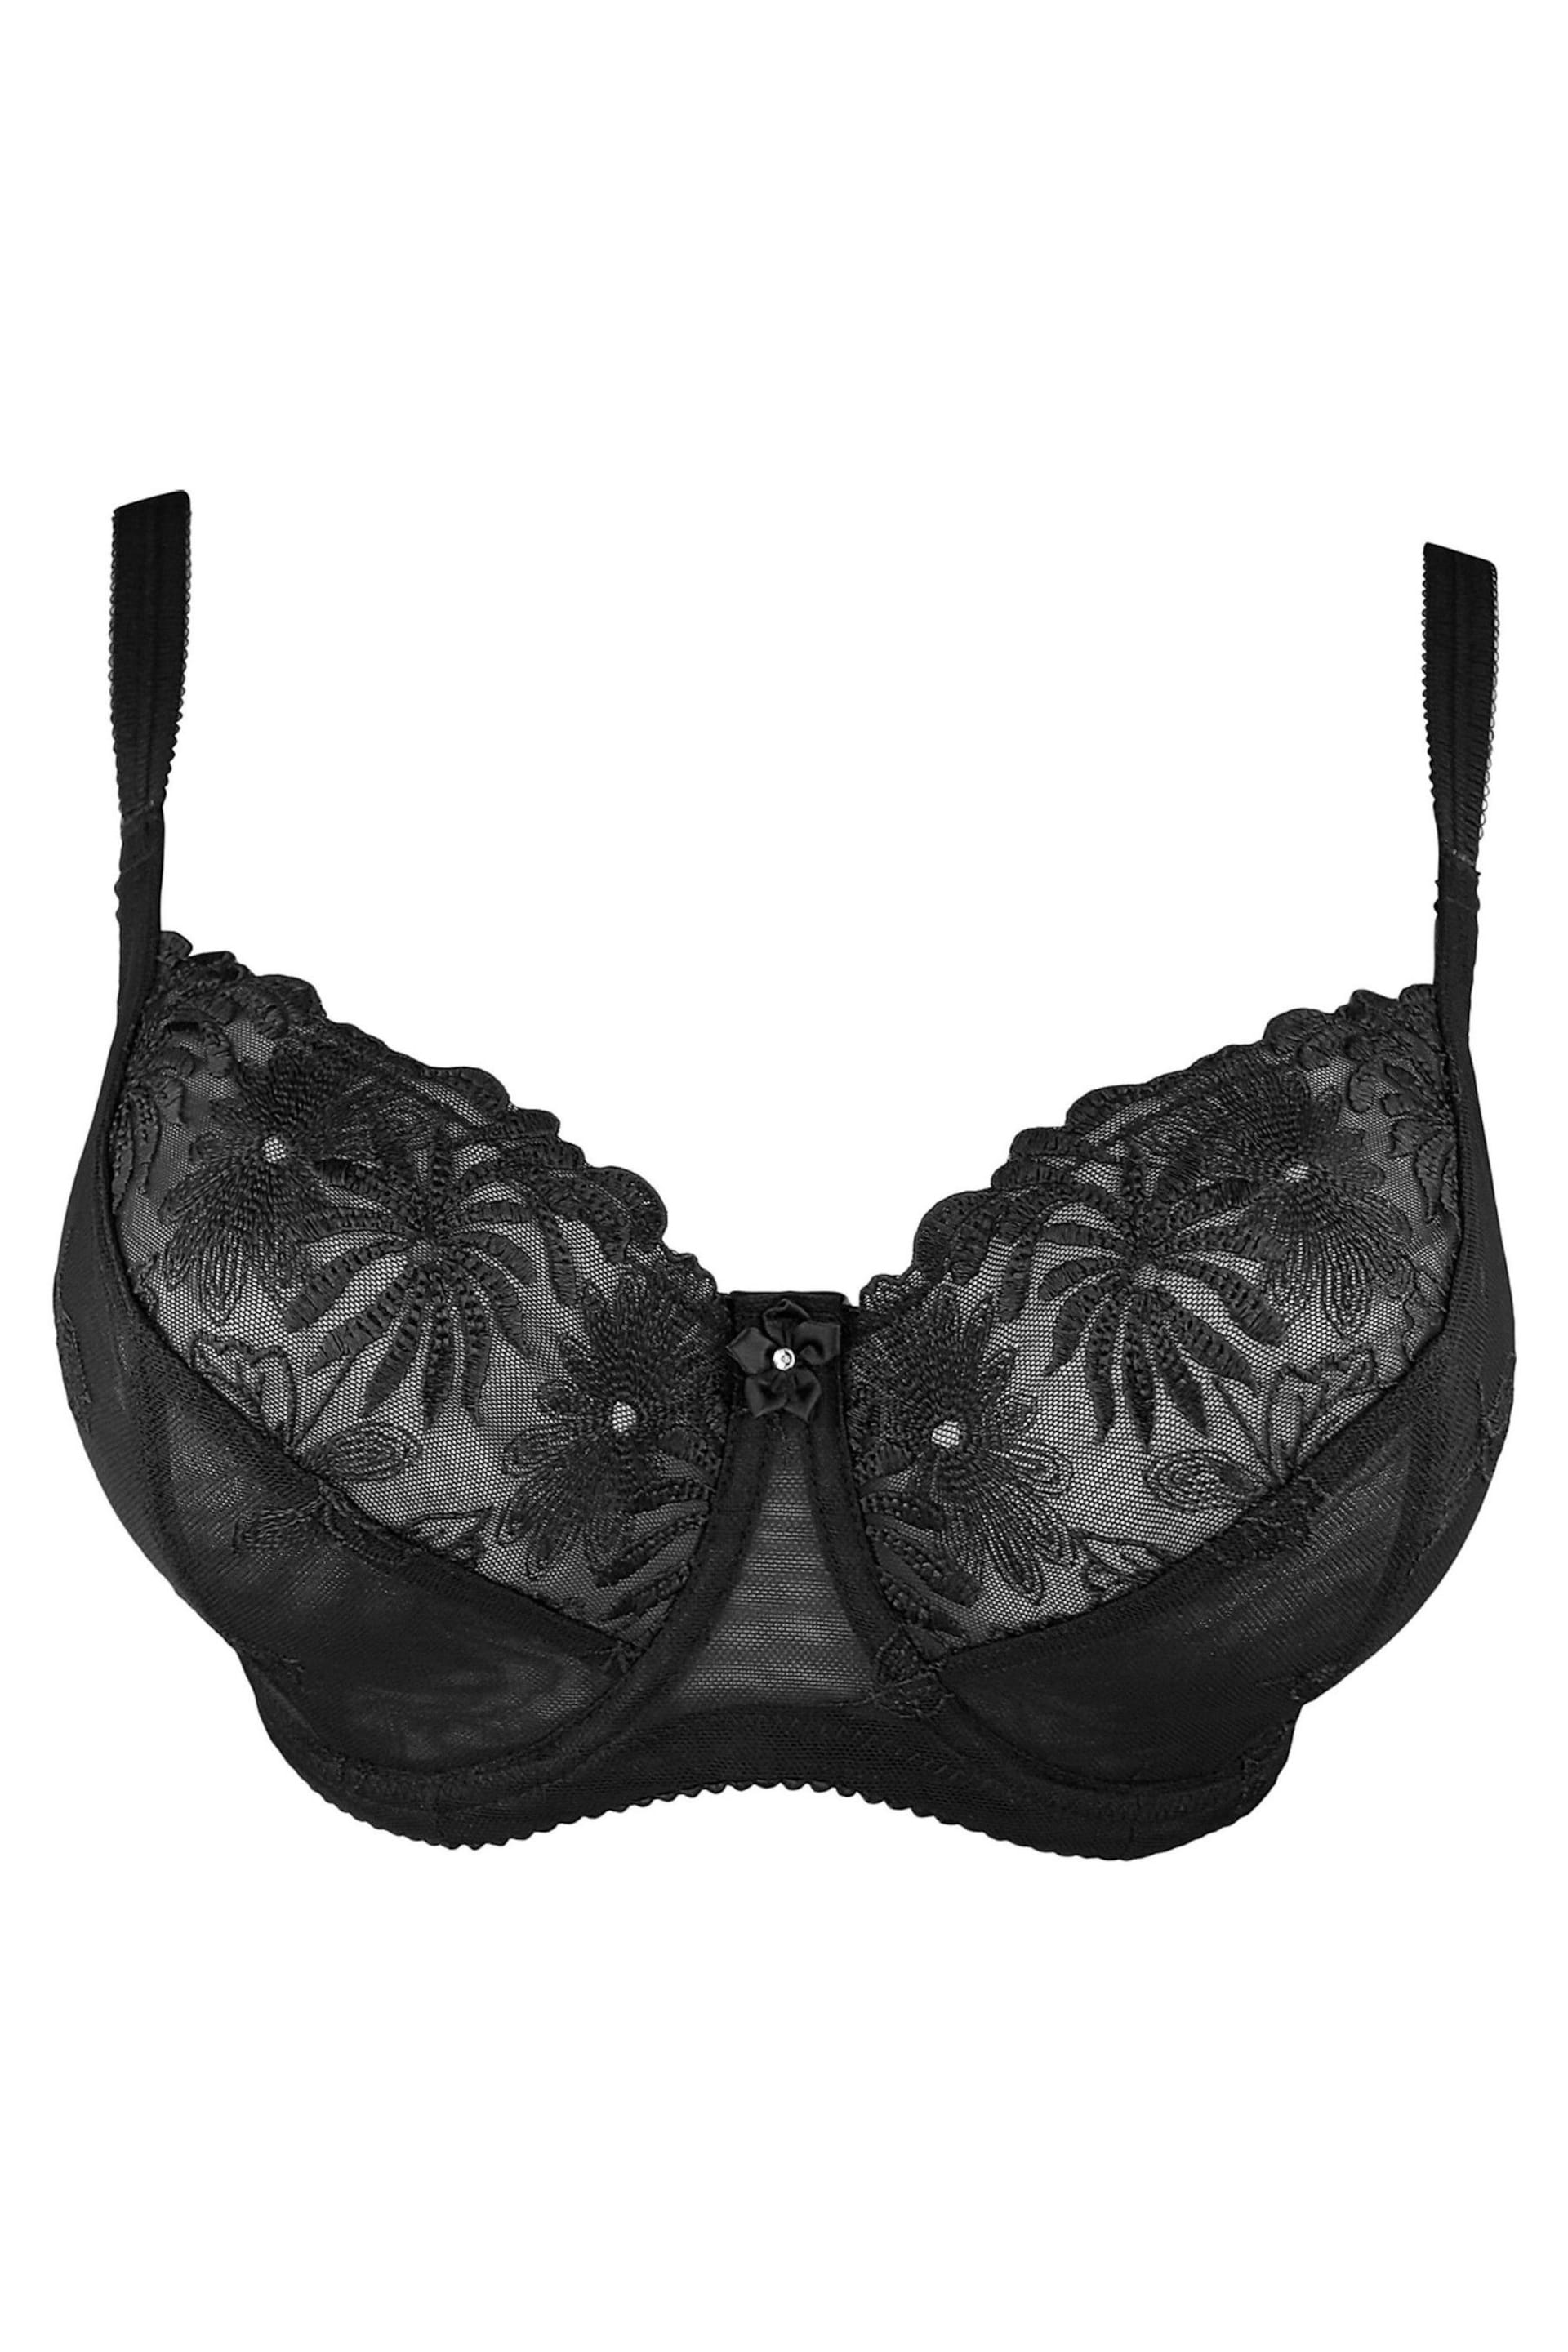 Pour Moi Black Non Padded Underwired St Tropez Full Cup Bra - Image 2 of 3